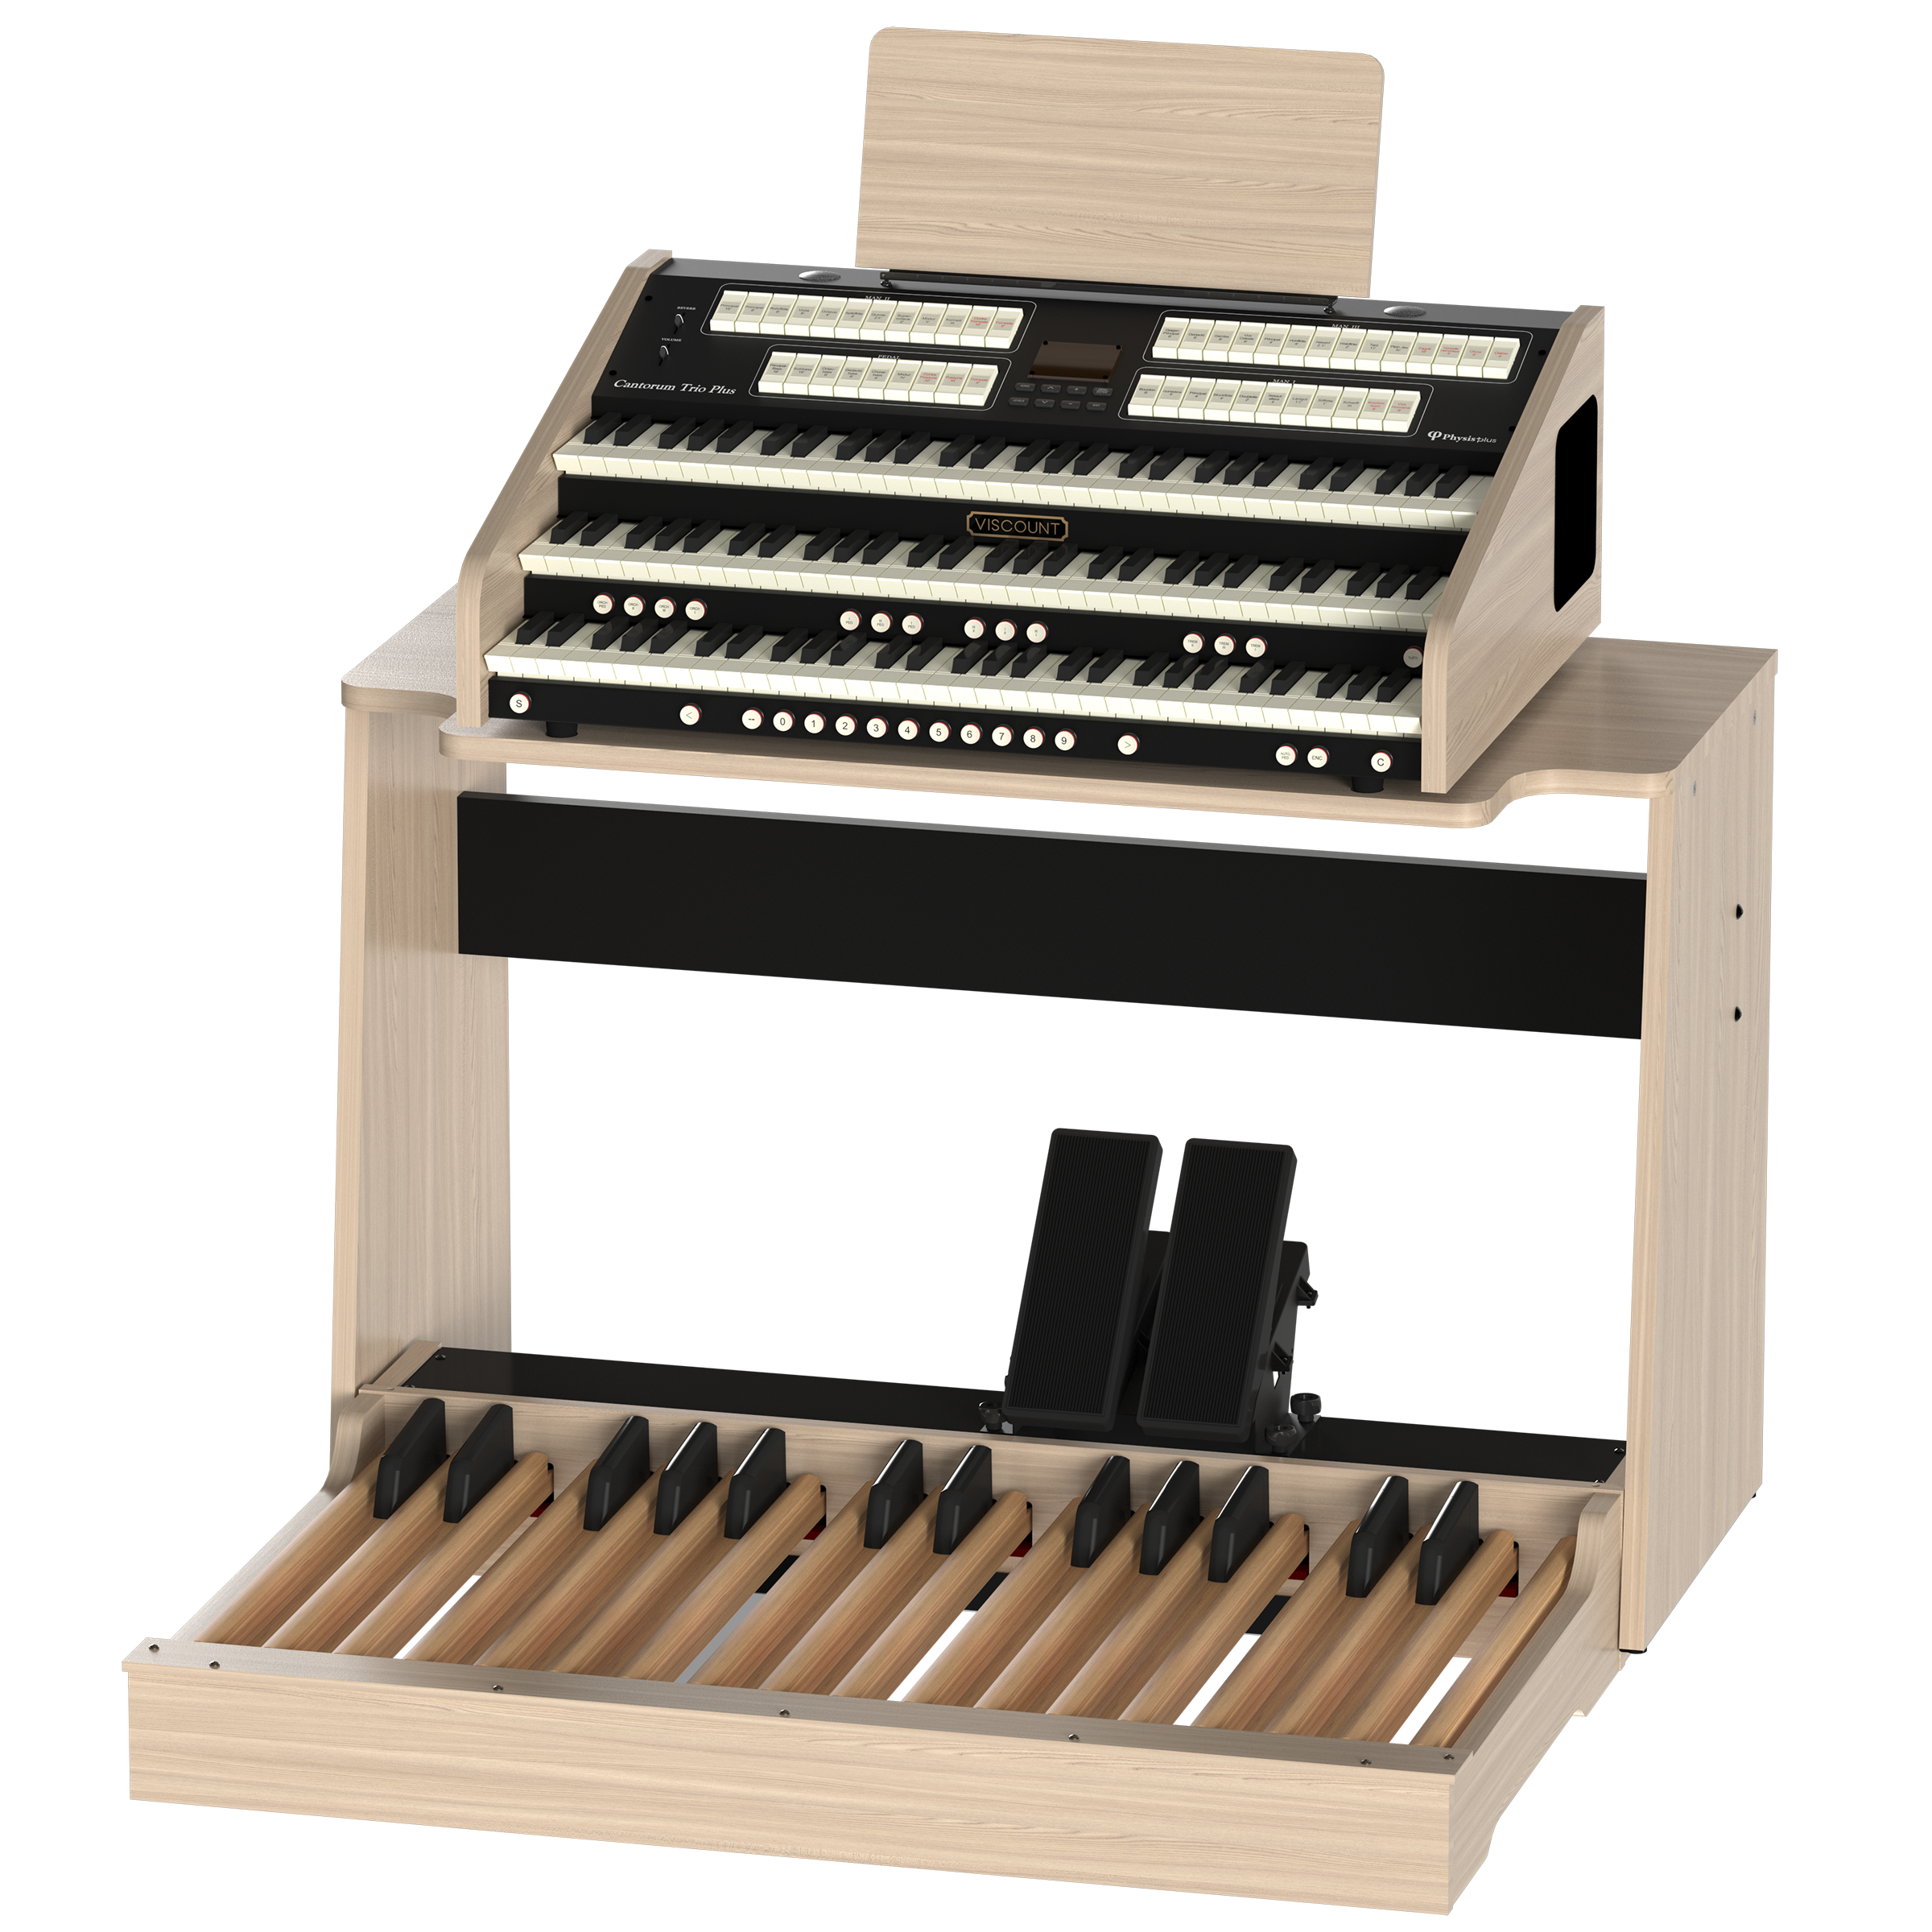 Viscount Cantorum Trio Plus 3 Manual Portable Organ WITH STAND, PEDALS